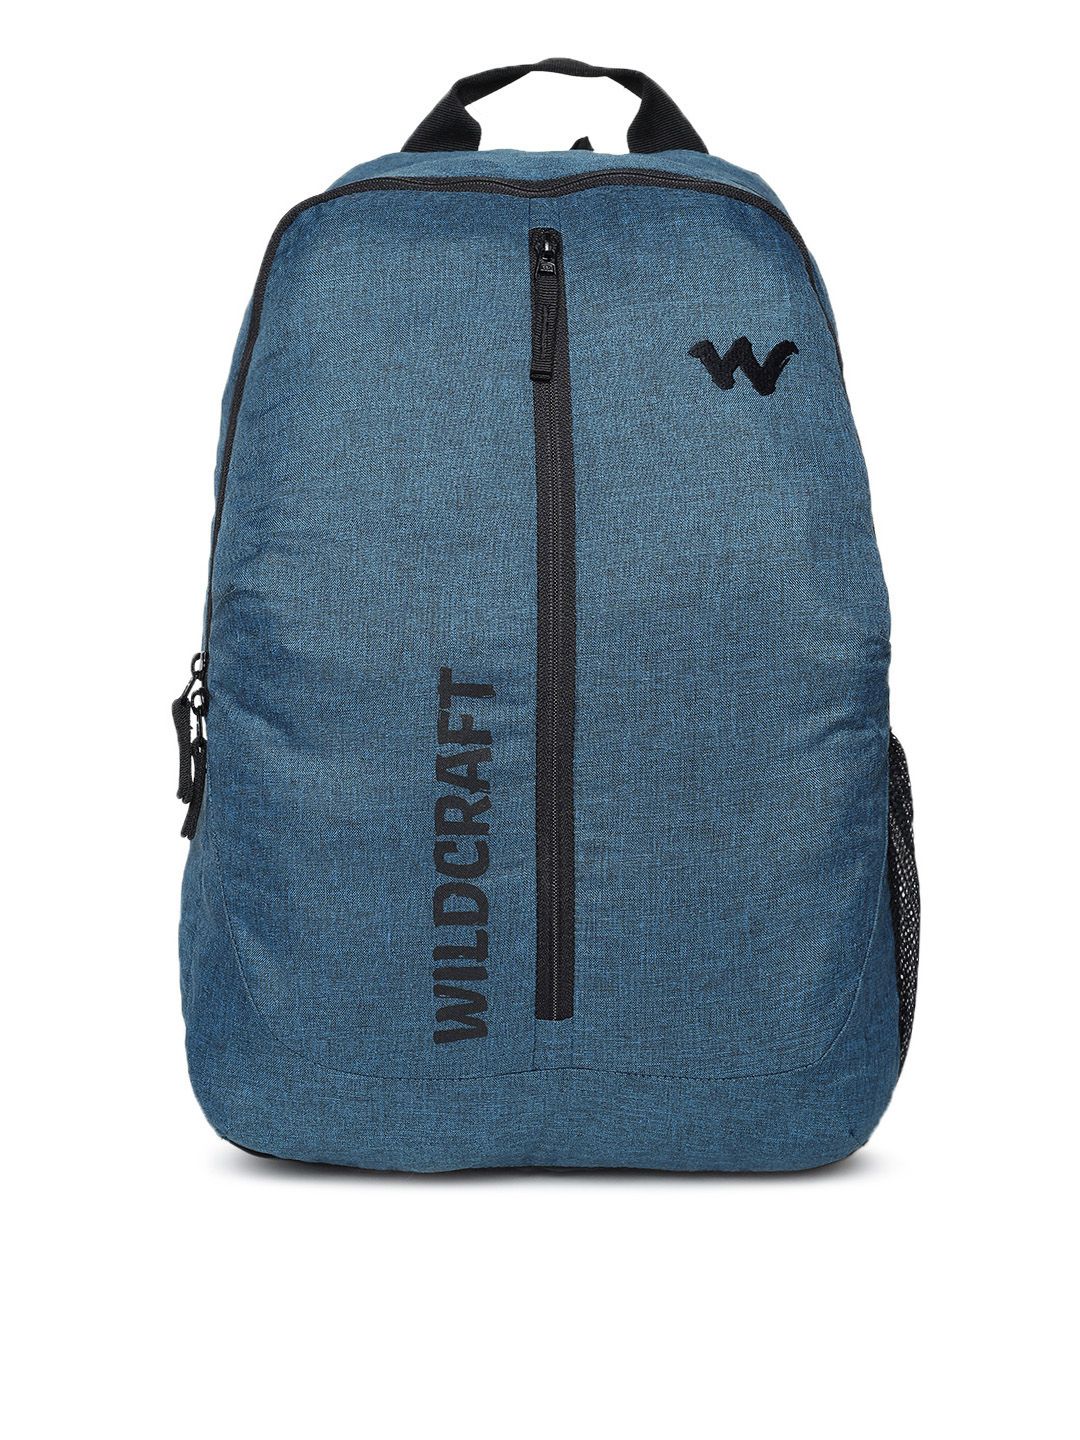 Wildcraft Unisex Blue Solid Backpack Price in India